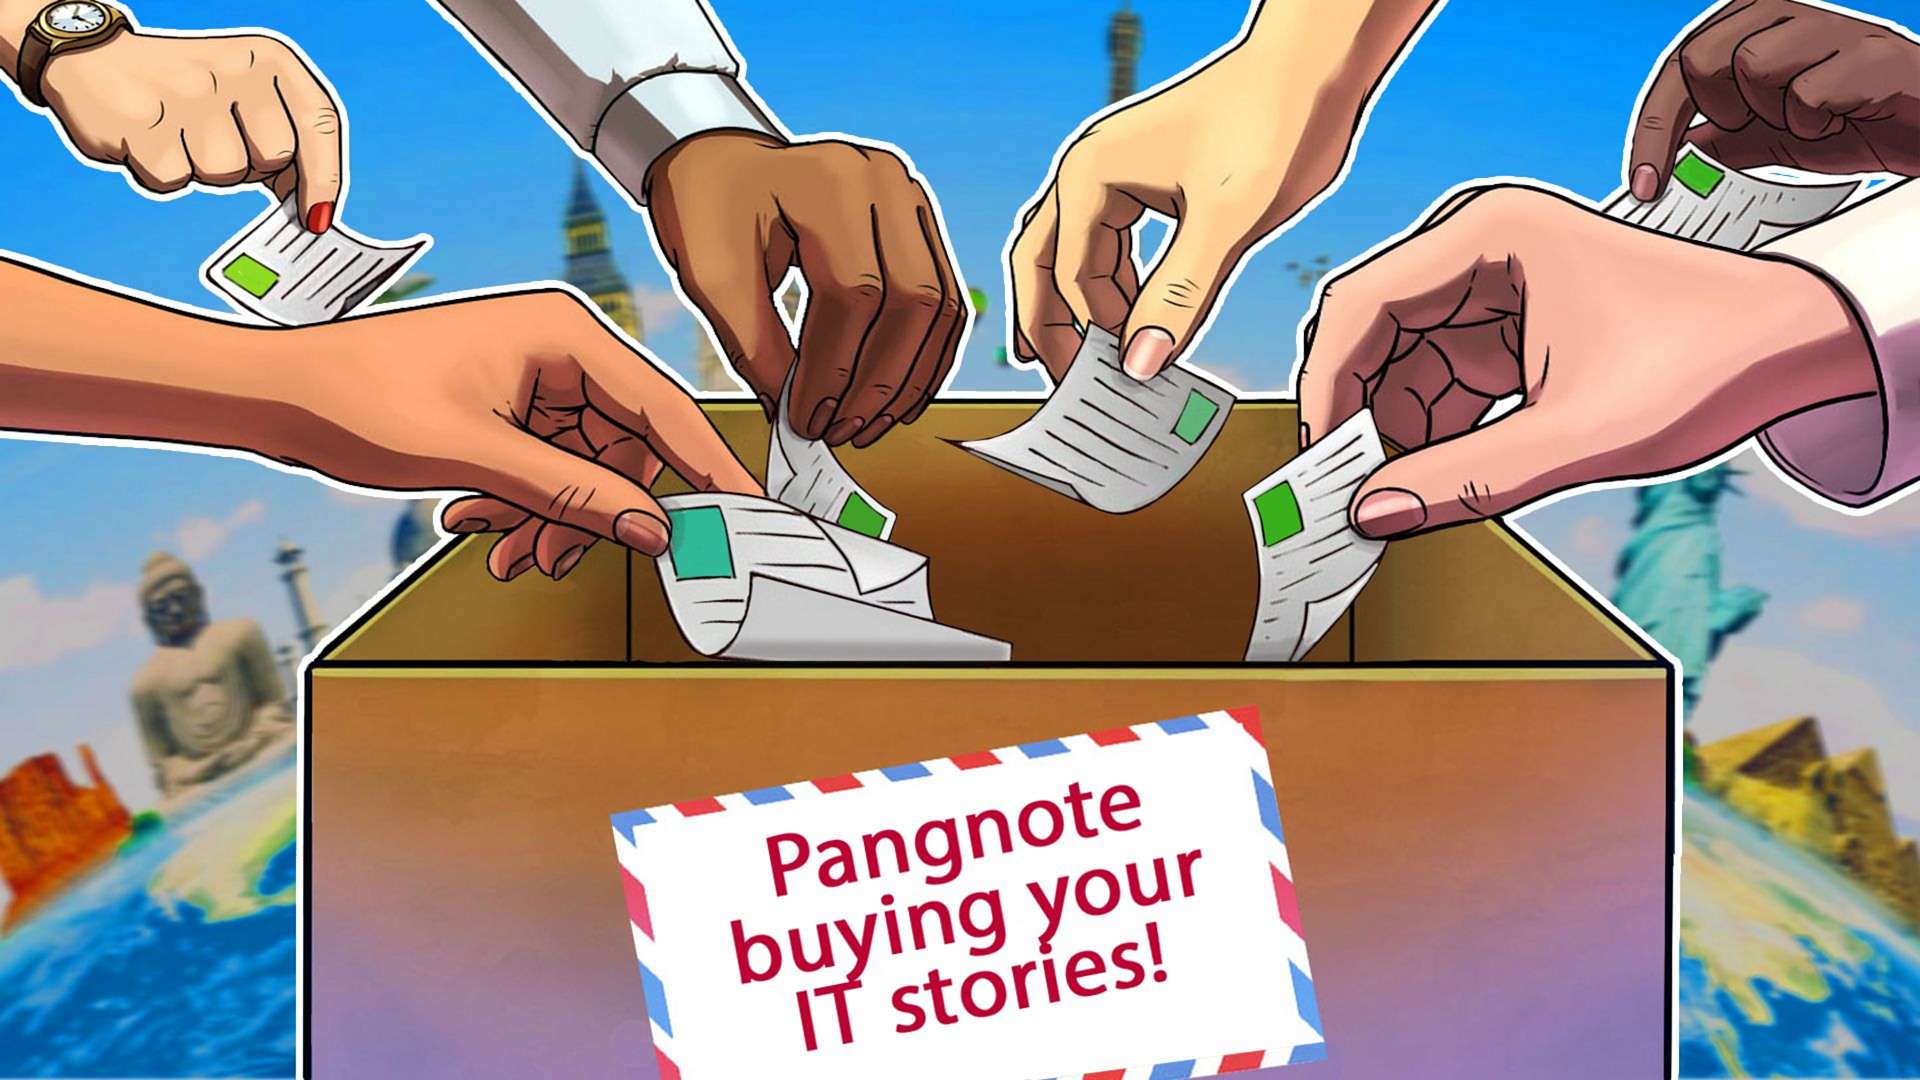 Pangnote is buying your IT stories 